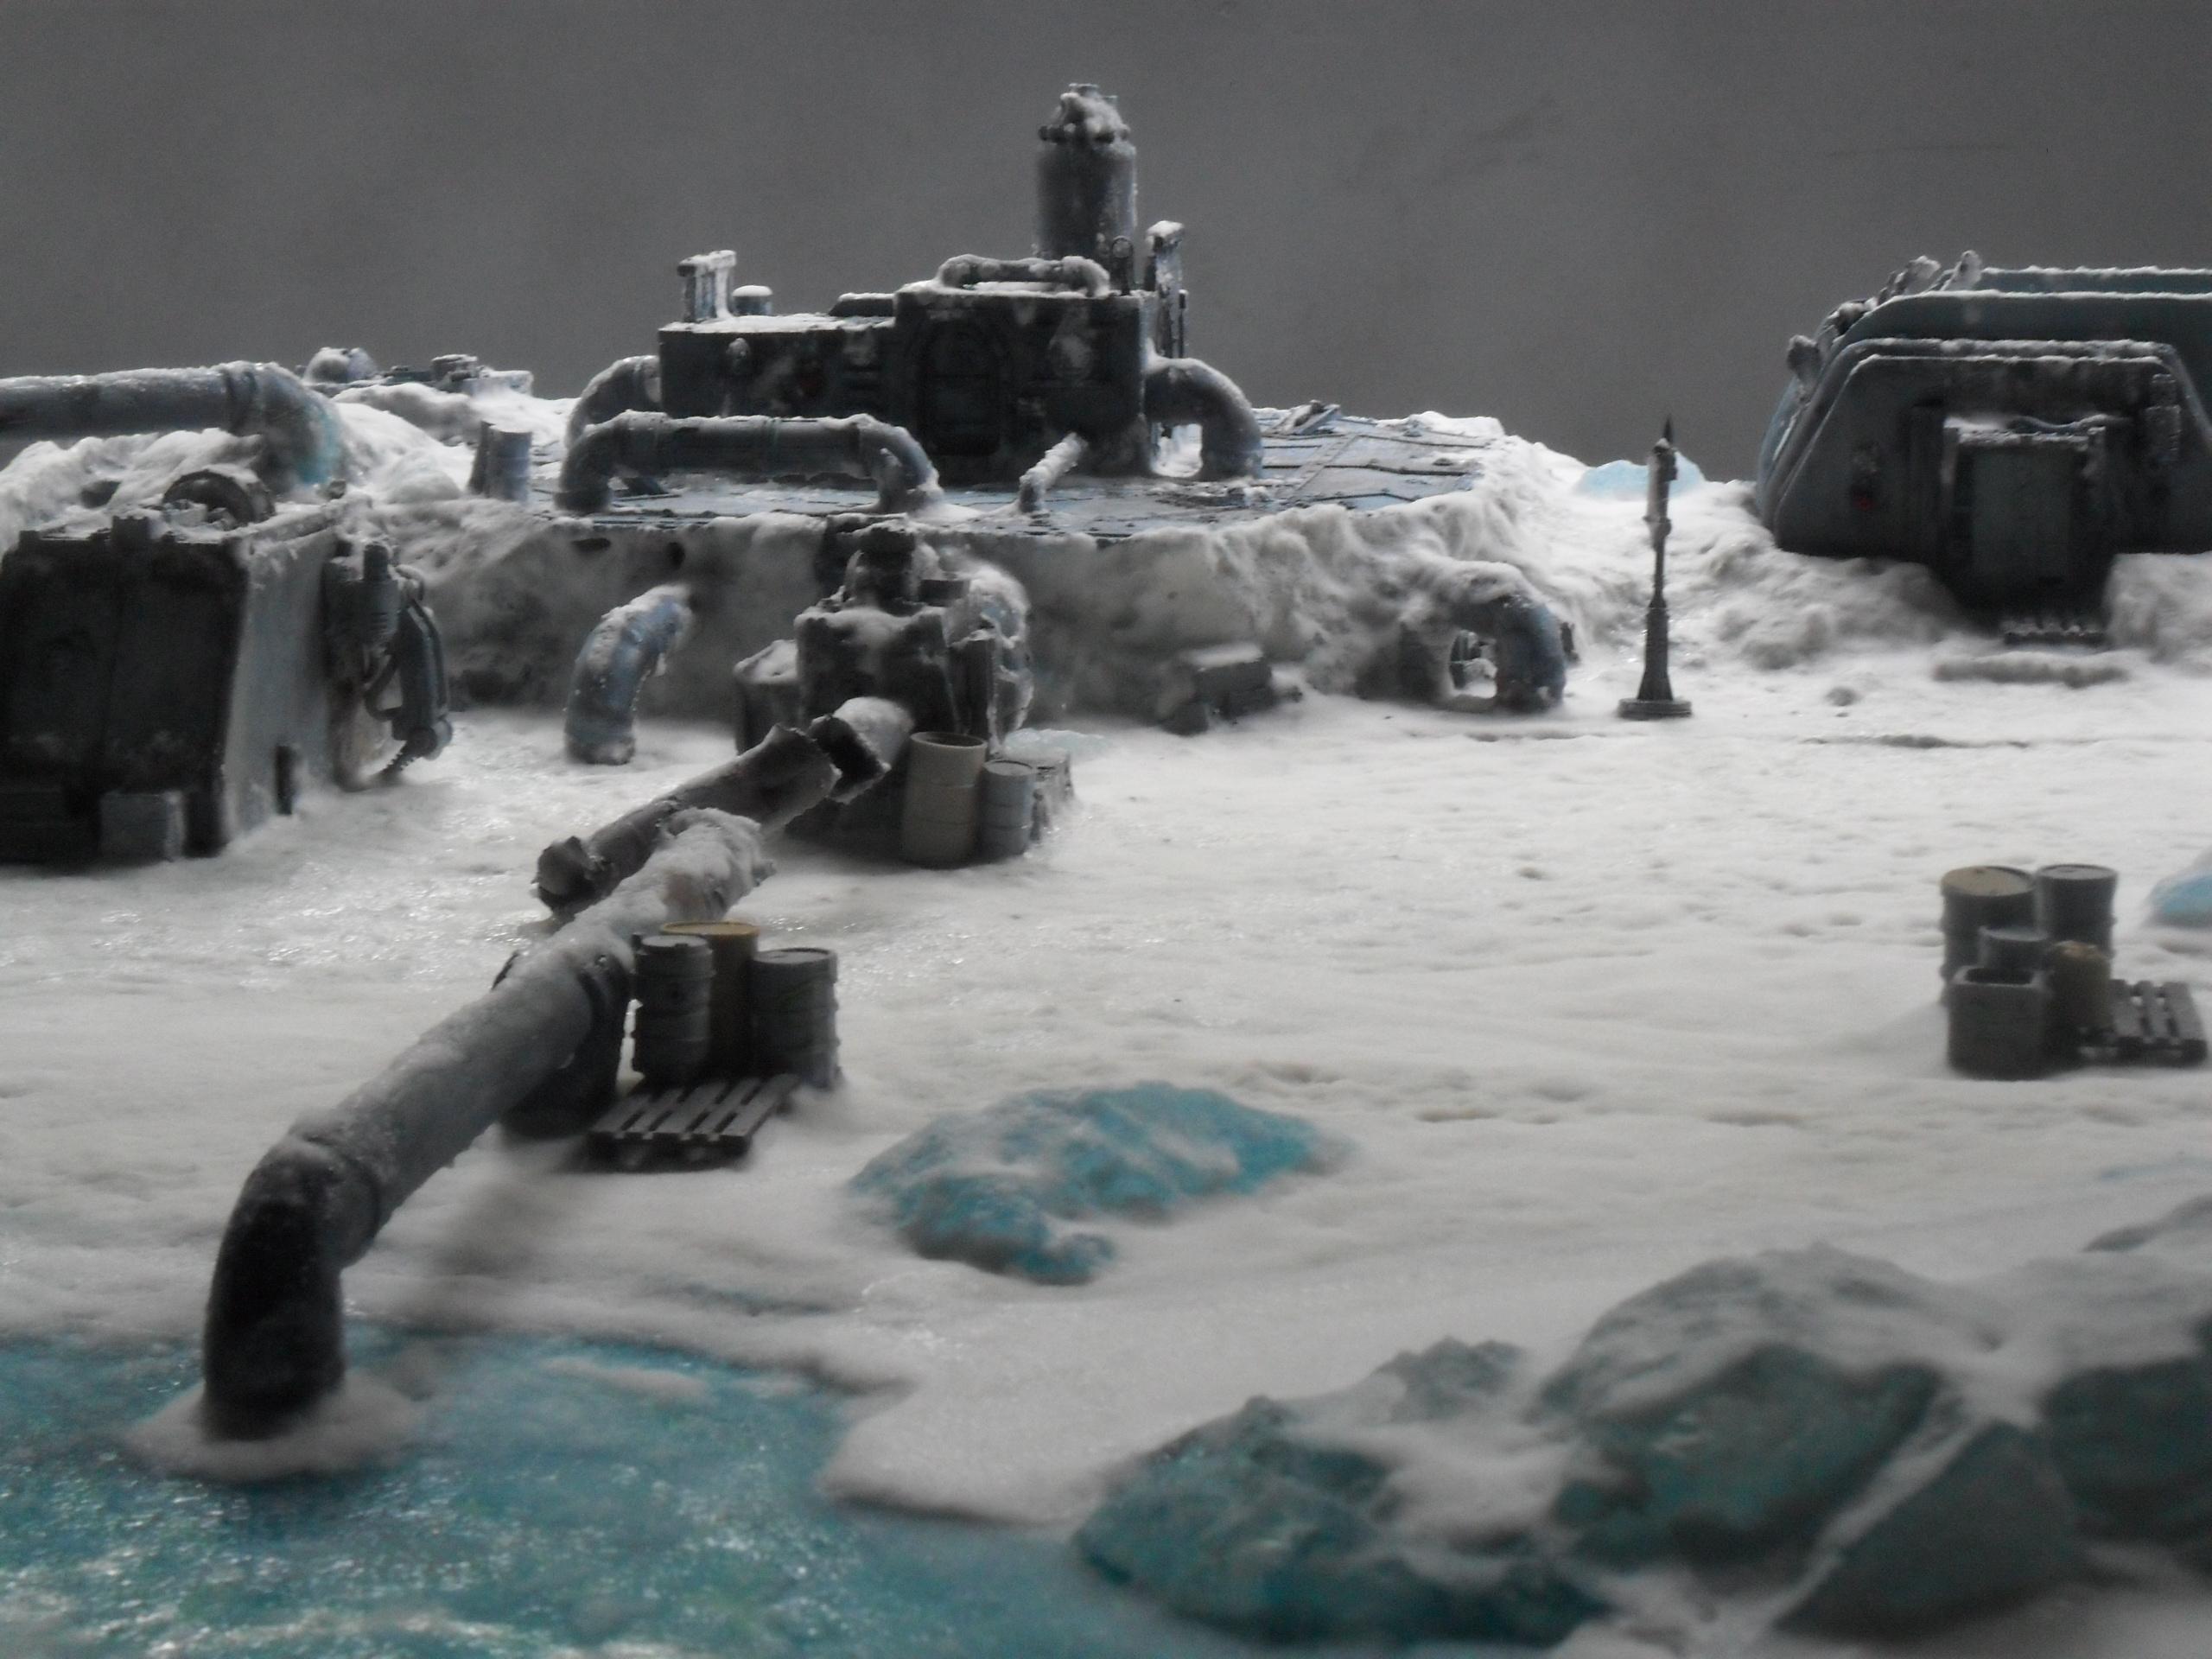 Antartic, Cities Of Death, Gameboard, Ice, Inq28, Pumping Station, Scratch Build, Snow, Terrain, Winter